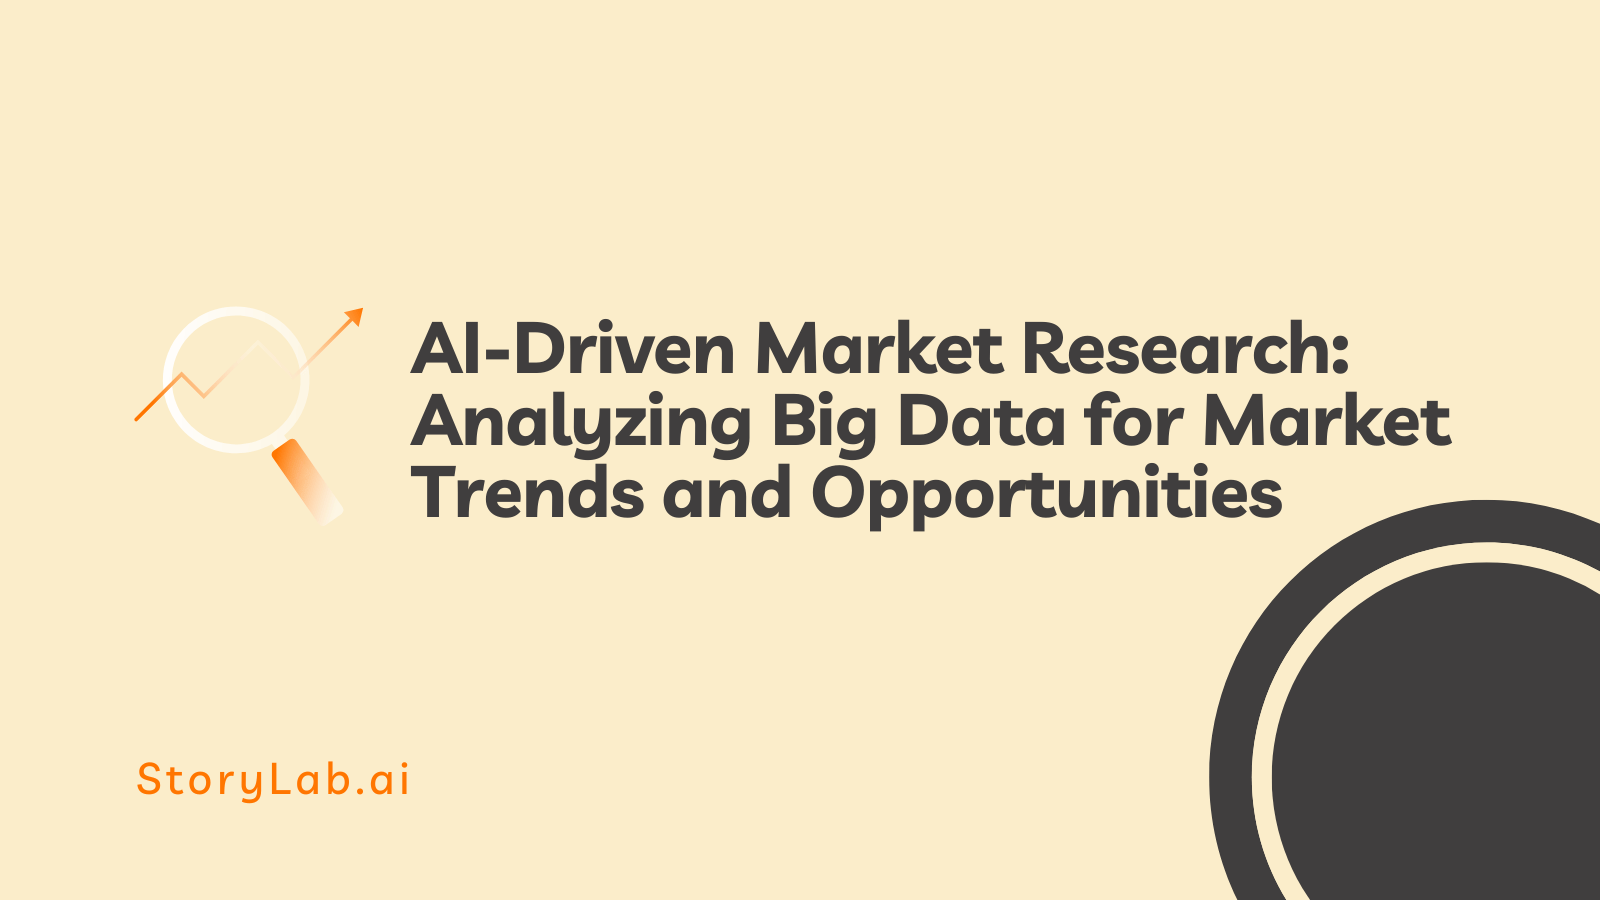 AI-Driven Market Research Analyzing Big Data for Market Trends and Opportunities